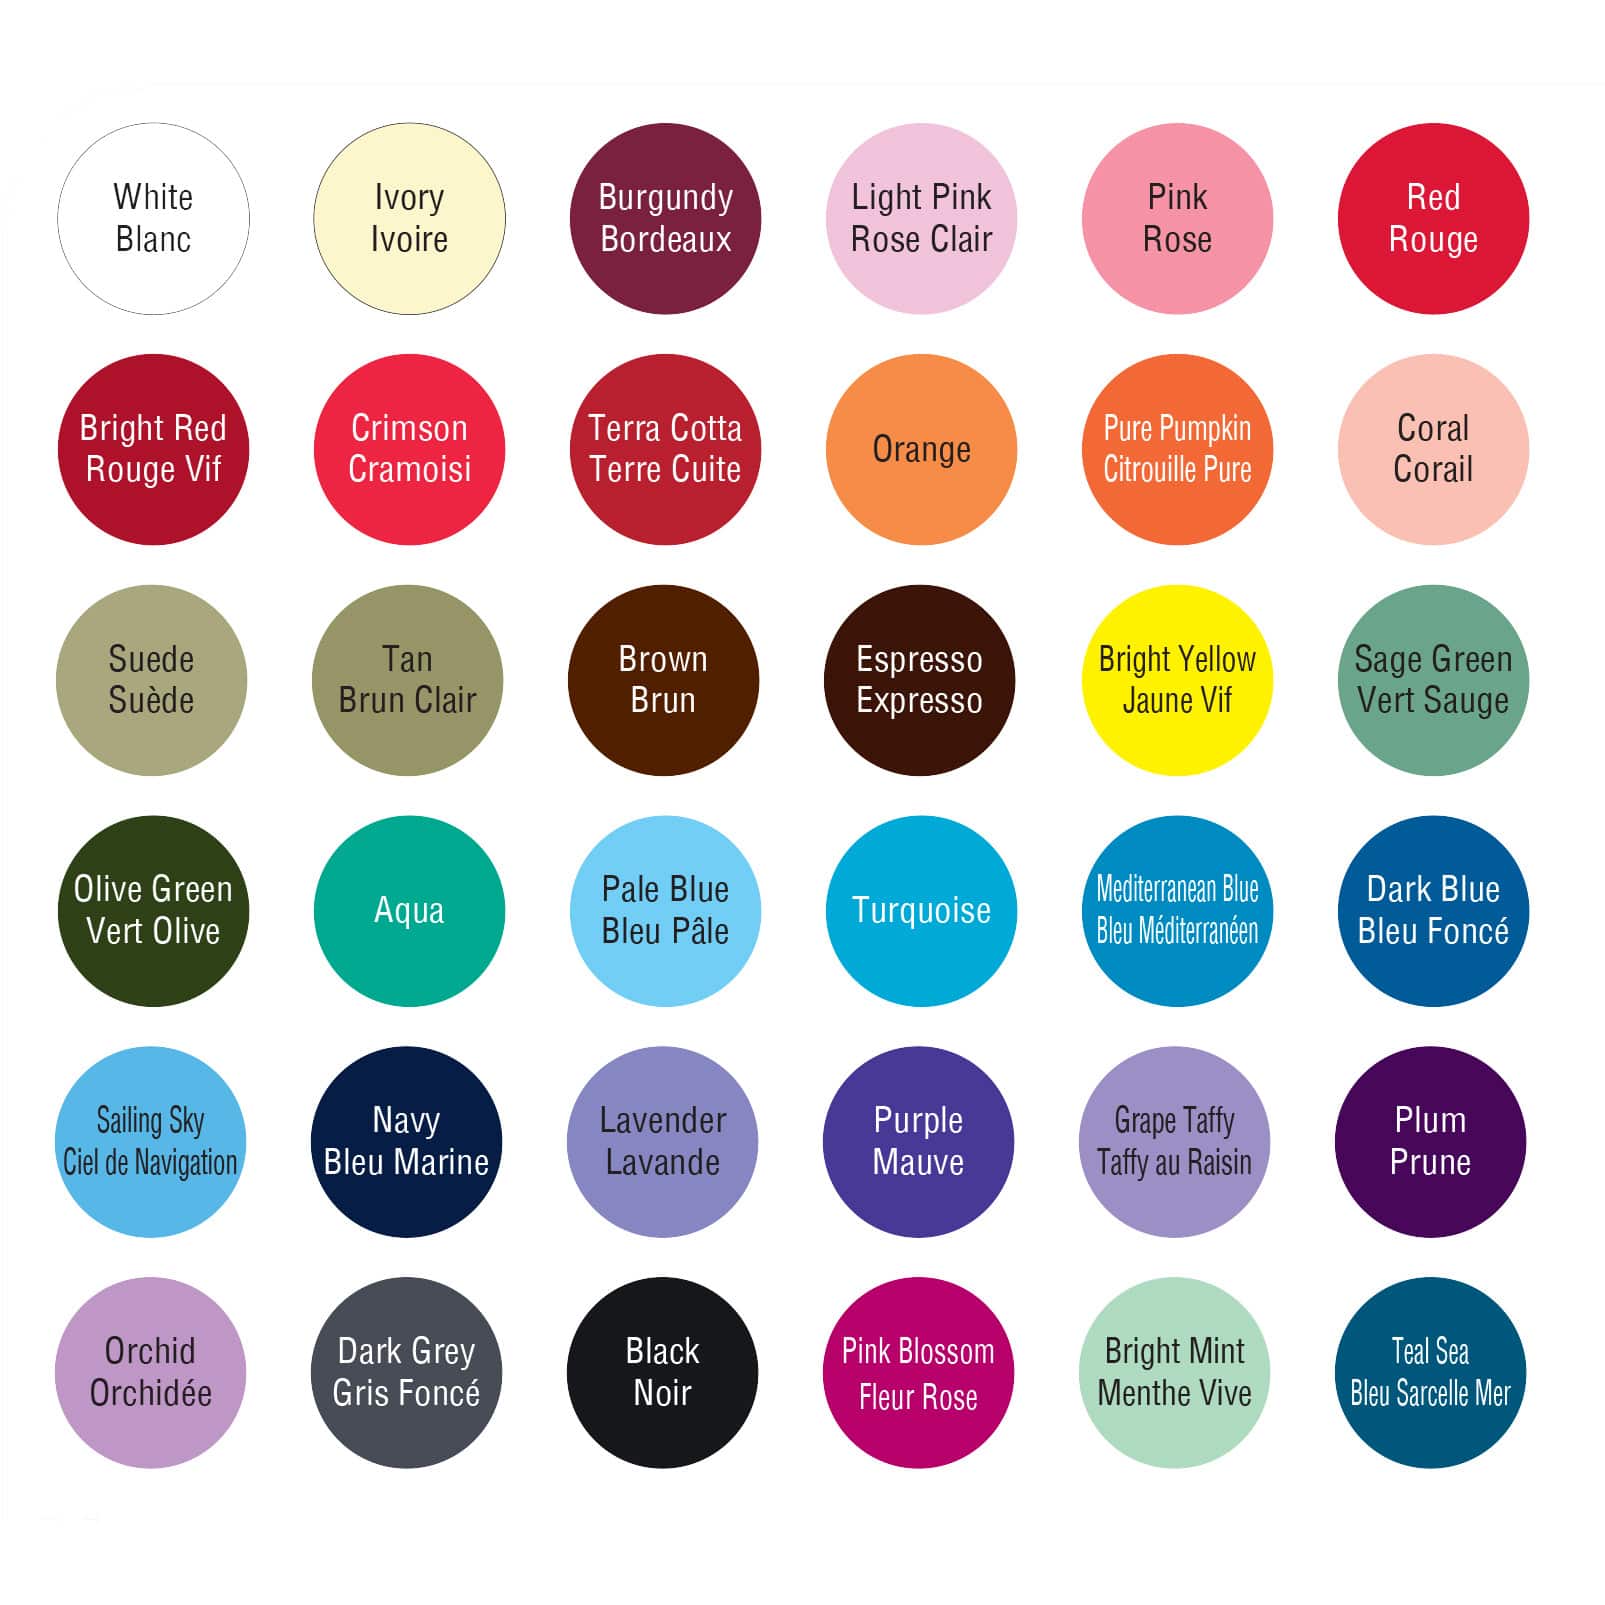 S Acrylic Craft Paint Color Chart